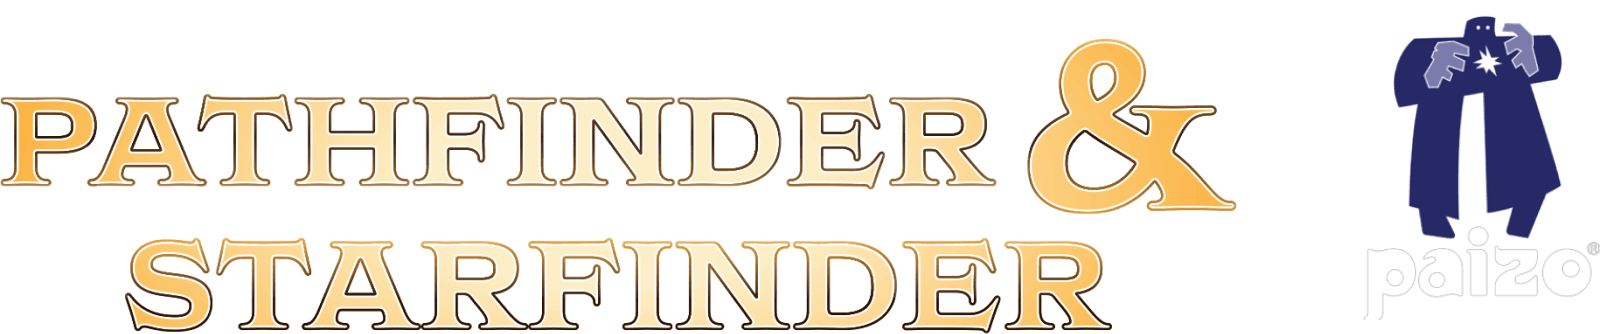 Give the Gift of Pathfinder & Starfinder by Paizo